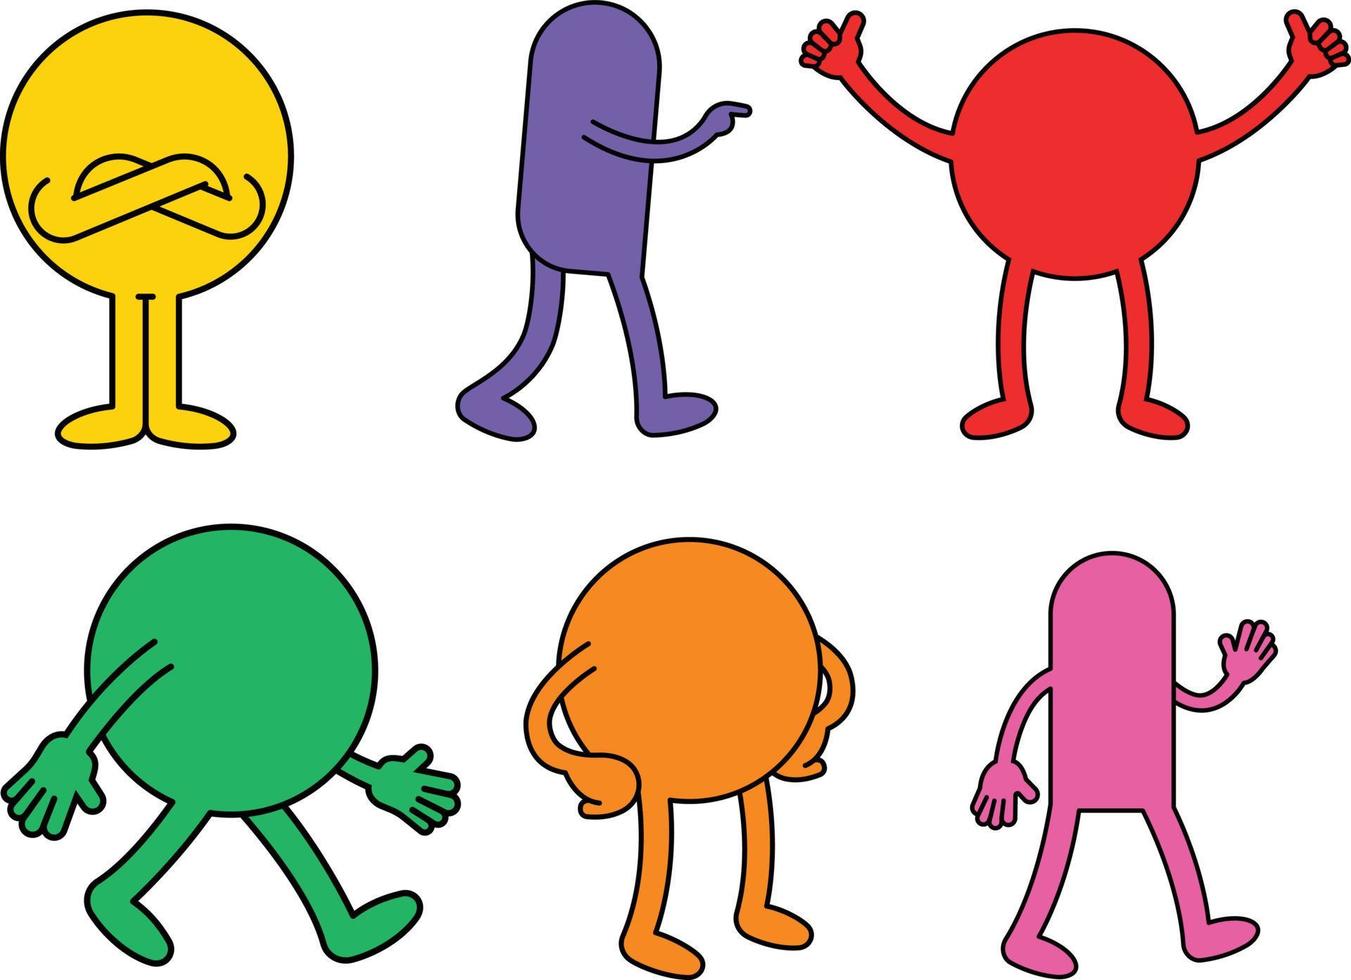 Set of colorful cartoon characters with different emotions. Hand drawn vector illustration.